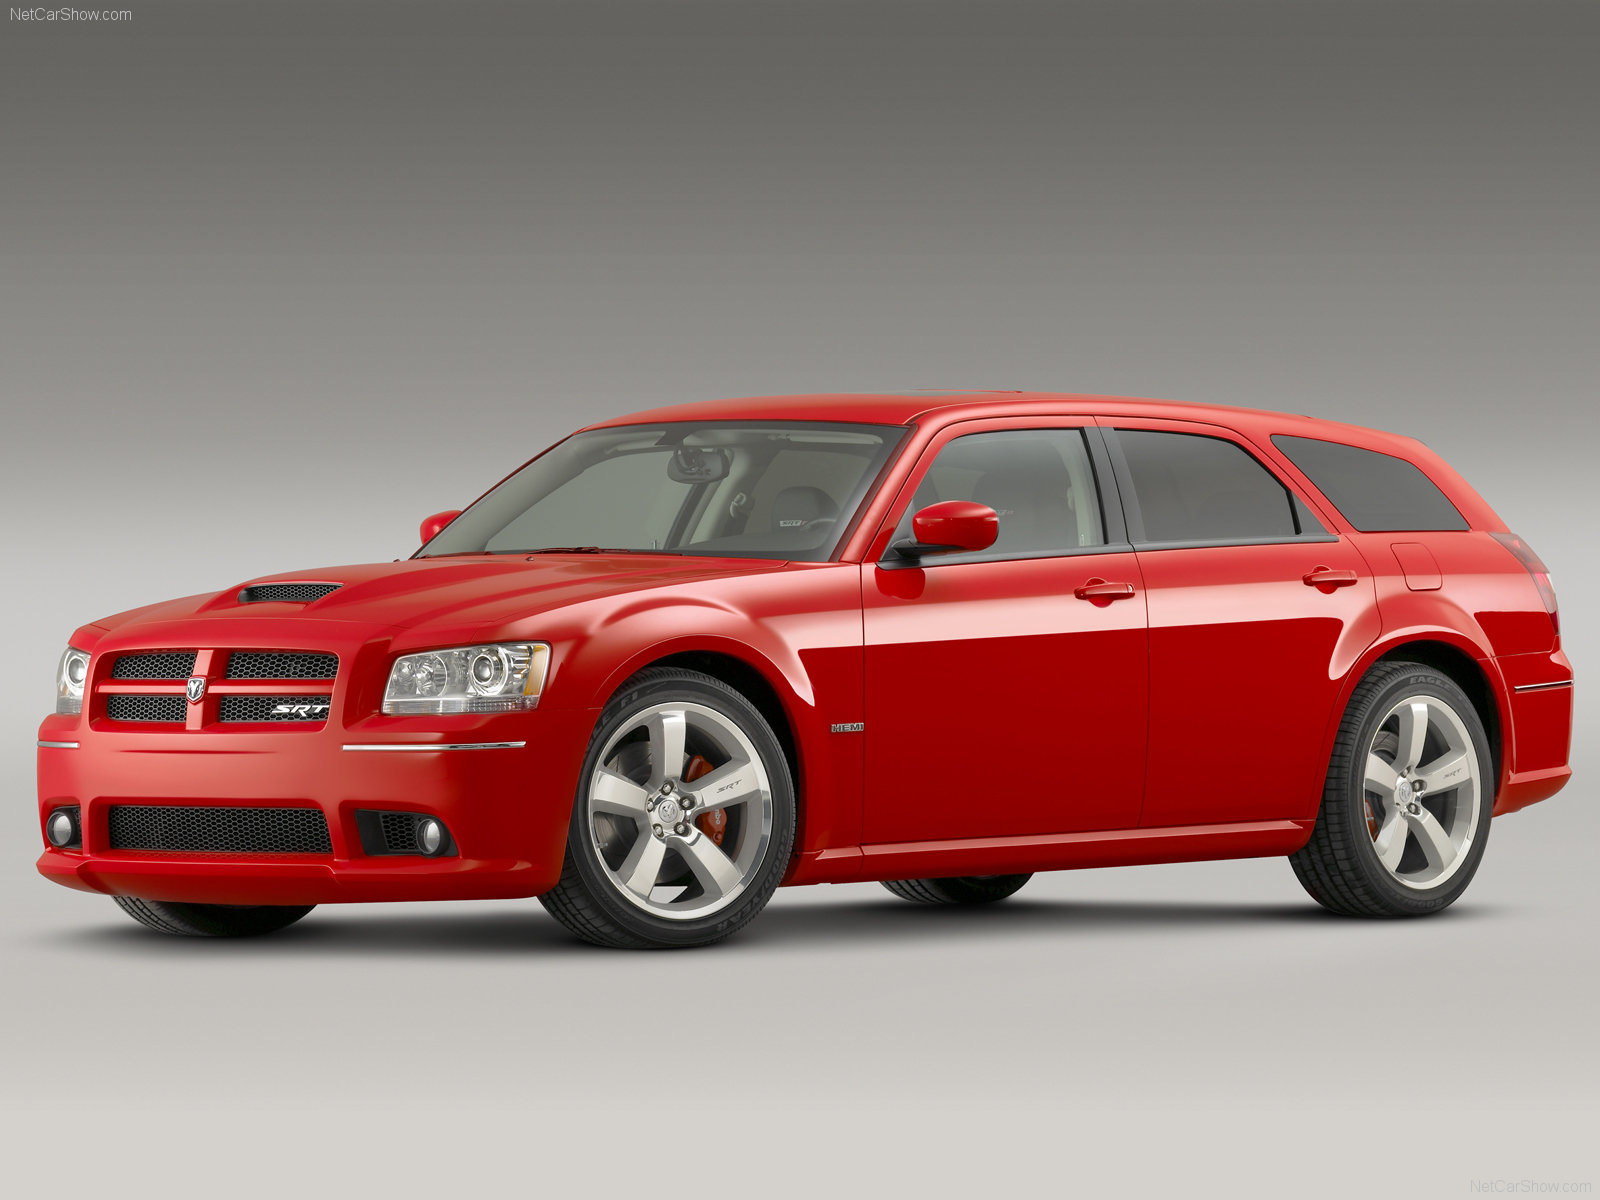 You can vote for this Dodge Magnum SRT-8 photo